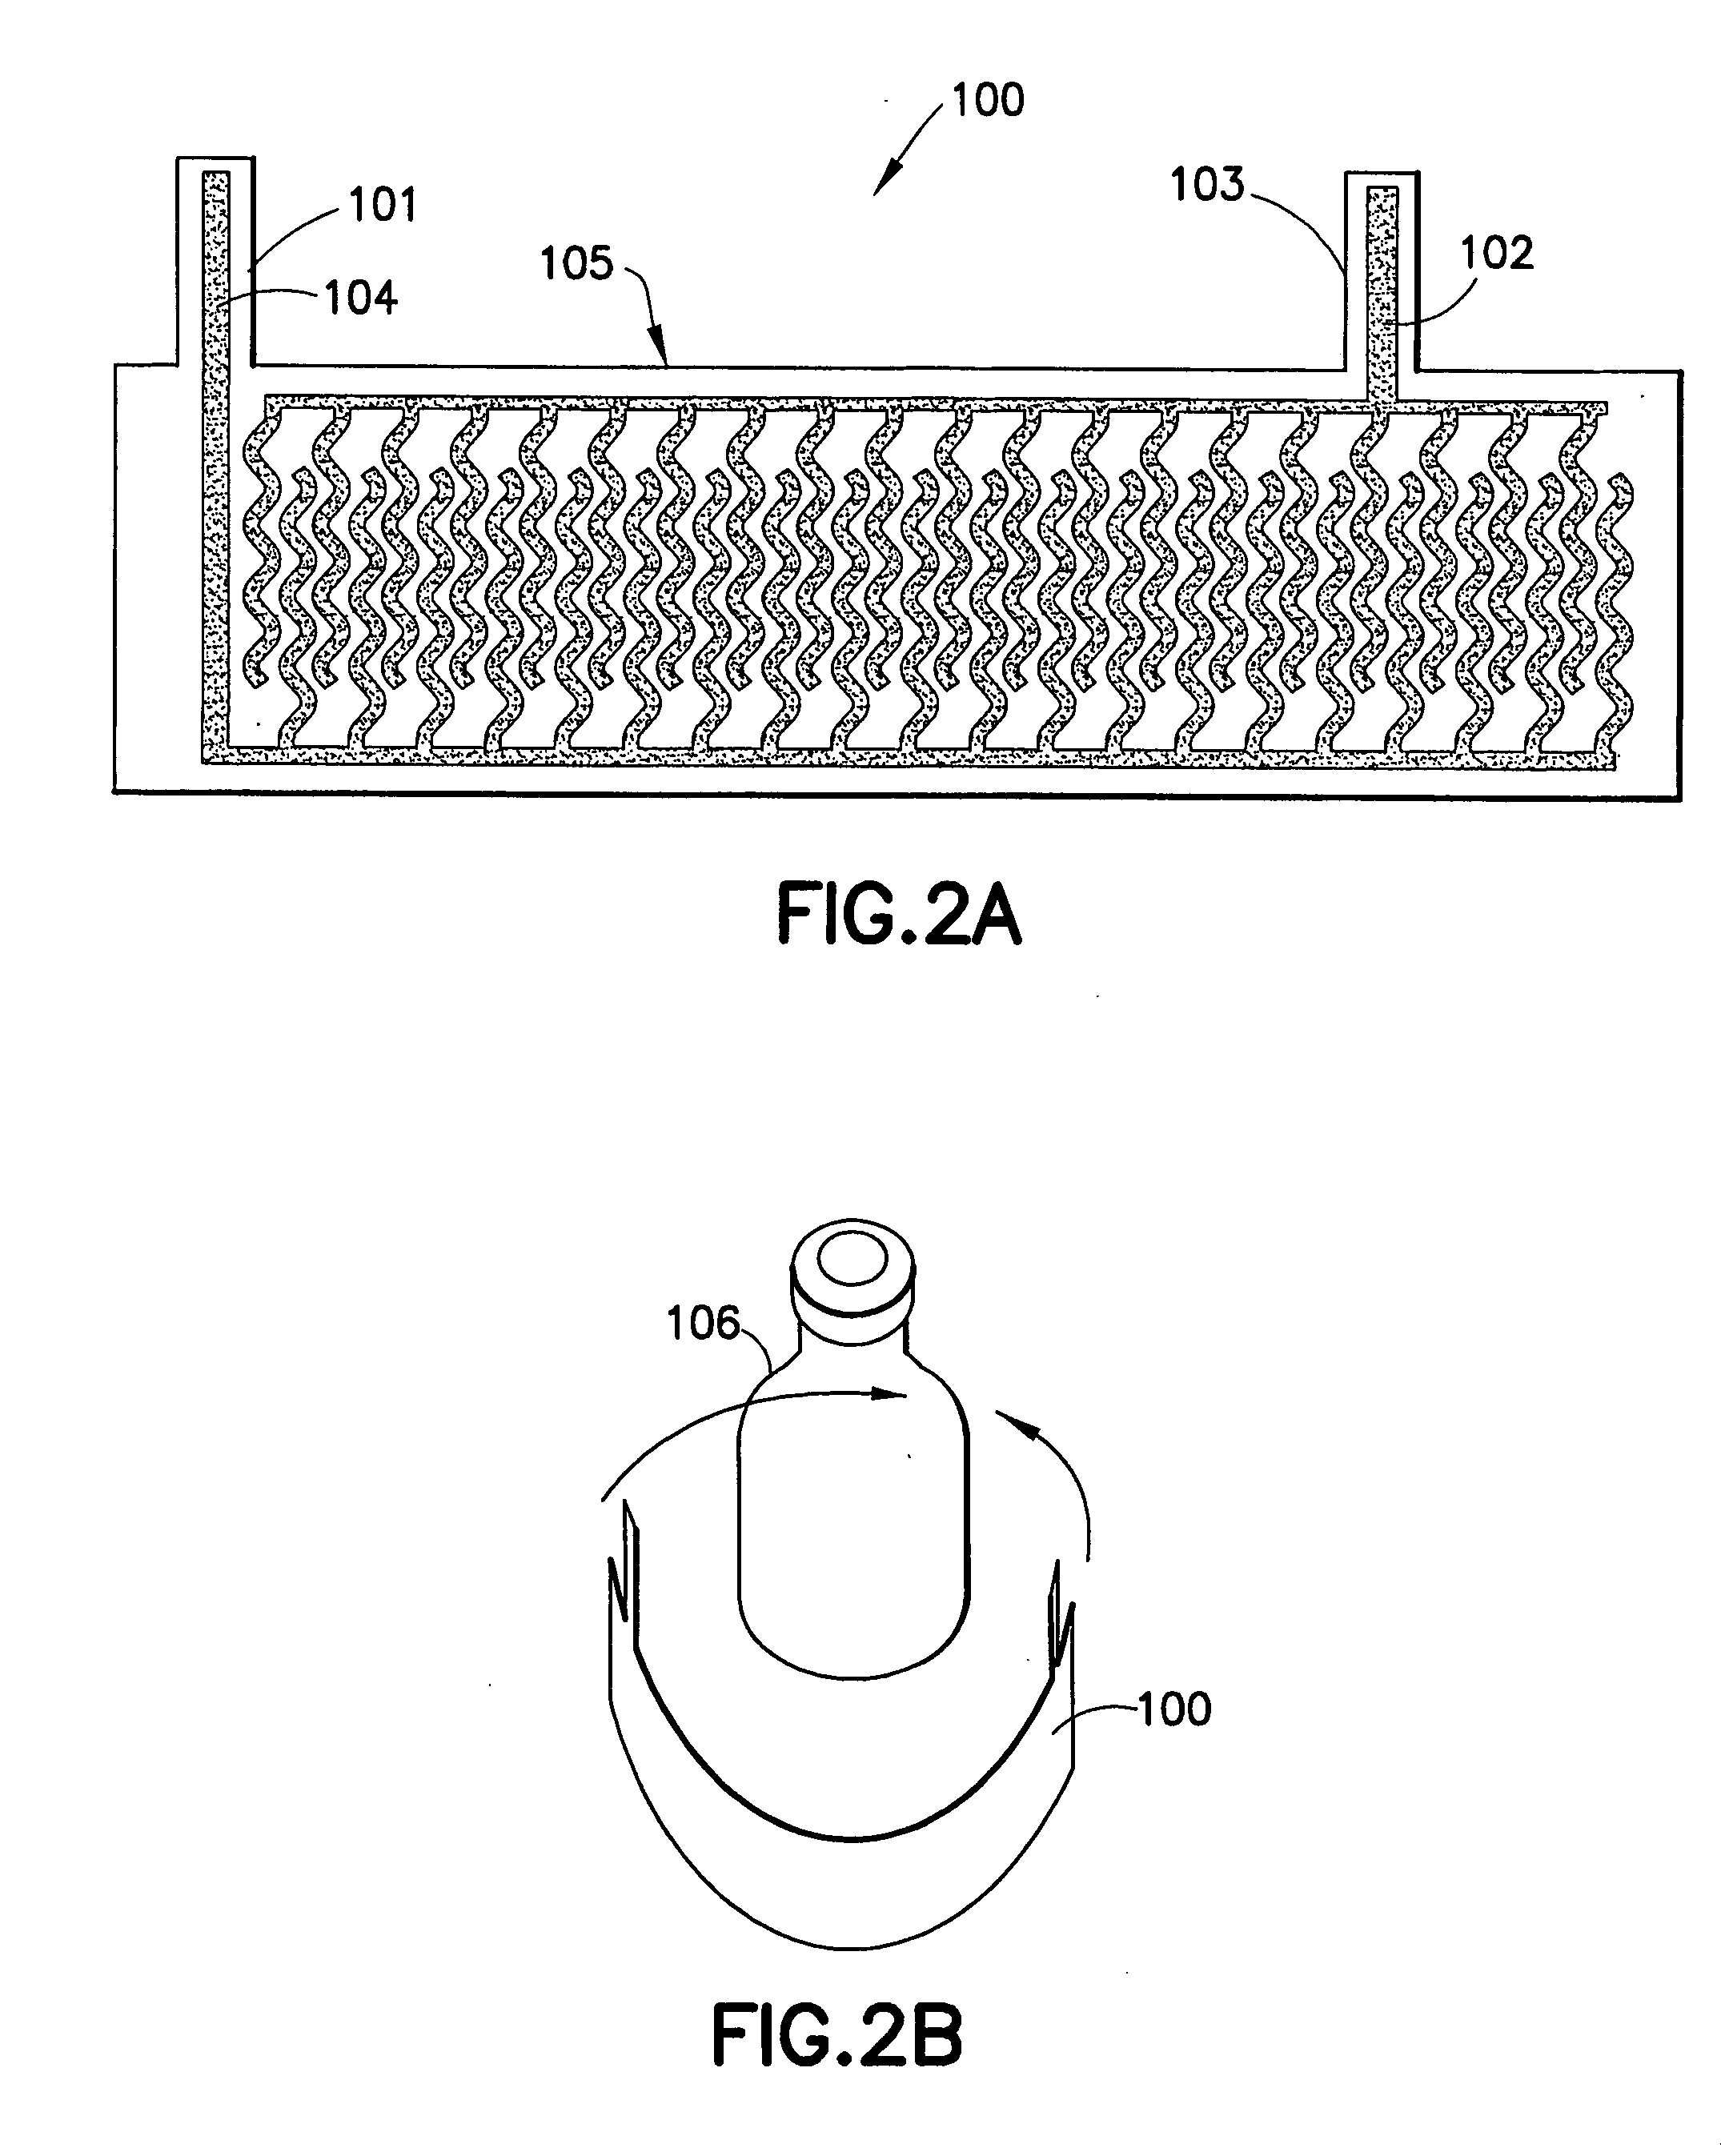 Detection method and apparatus for detecting microbial growth